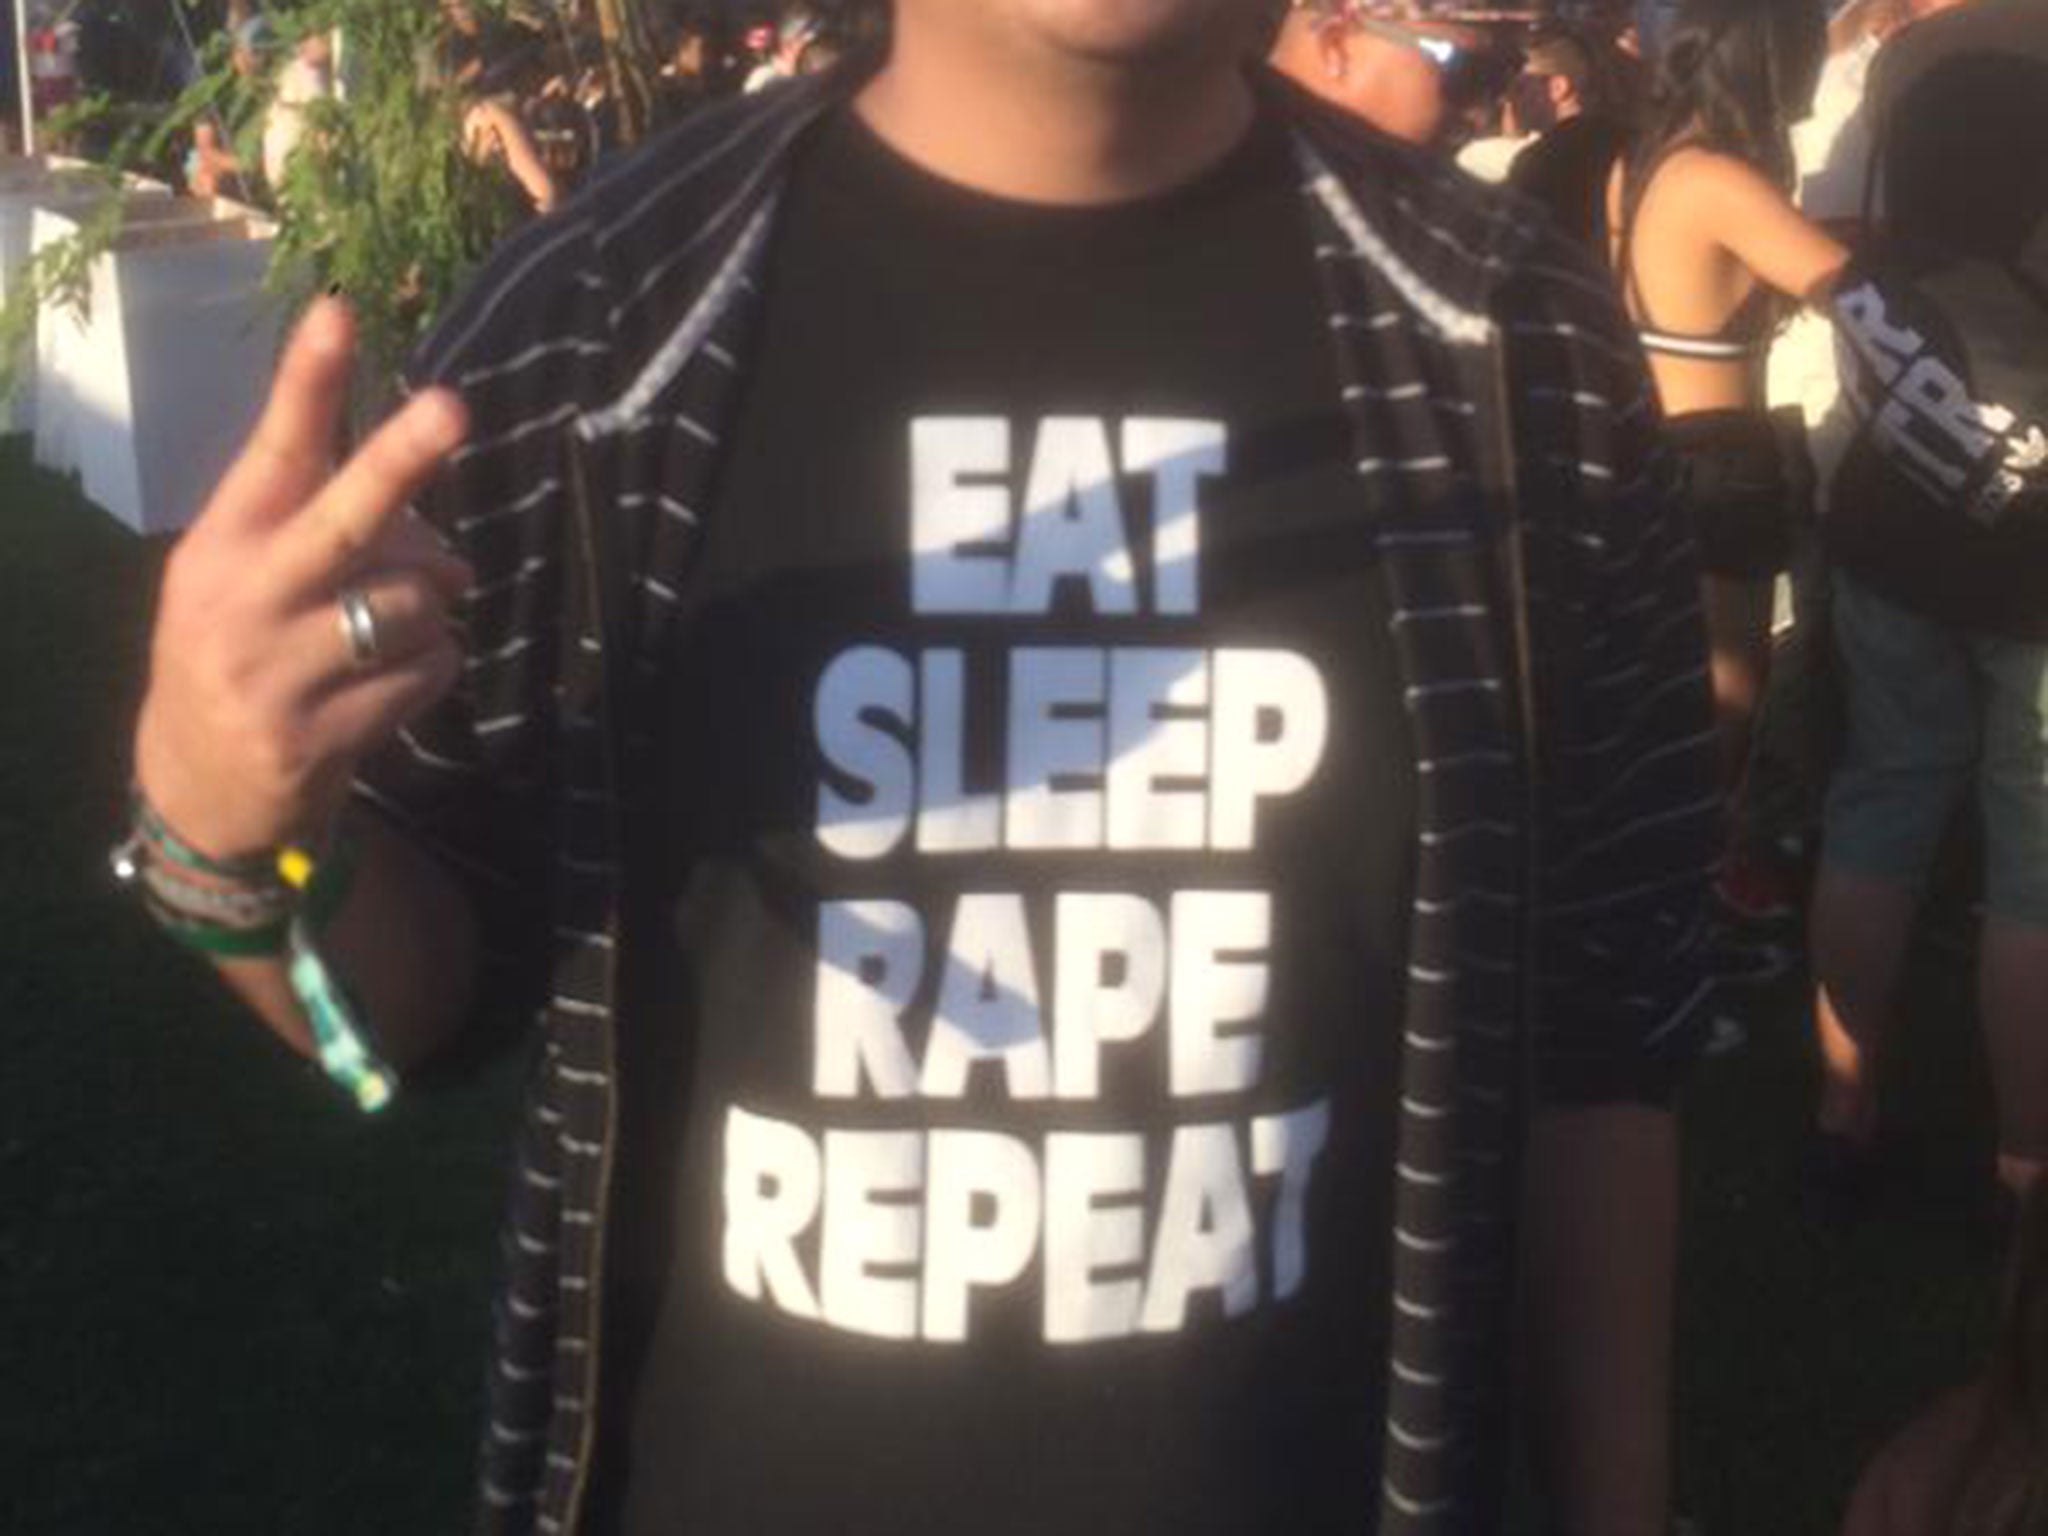 Snazzy Sind Fjerde Coachella 2015: Man's 'Eat, Sleep, Rape, Repeat' T-shirt sparks outrage |  The Independent | The Independent